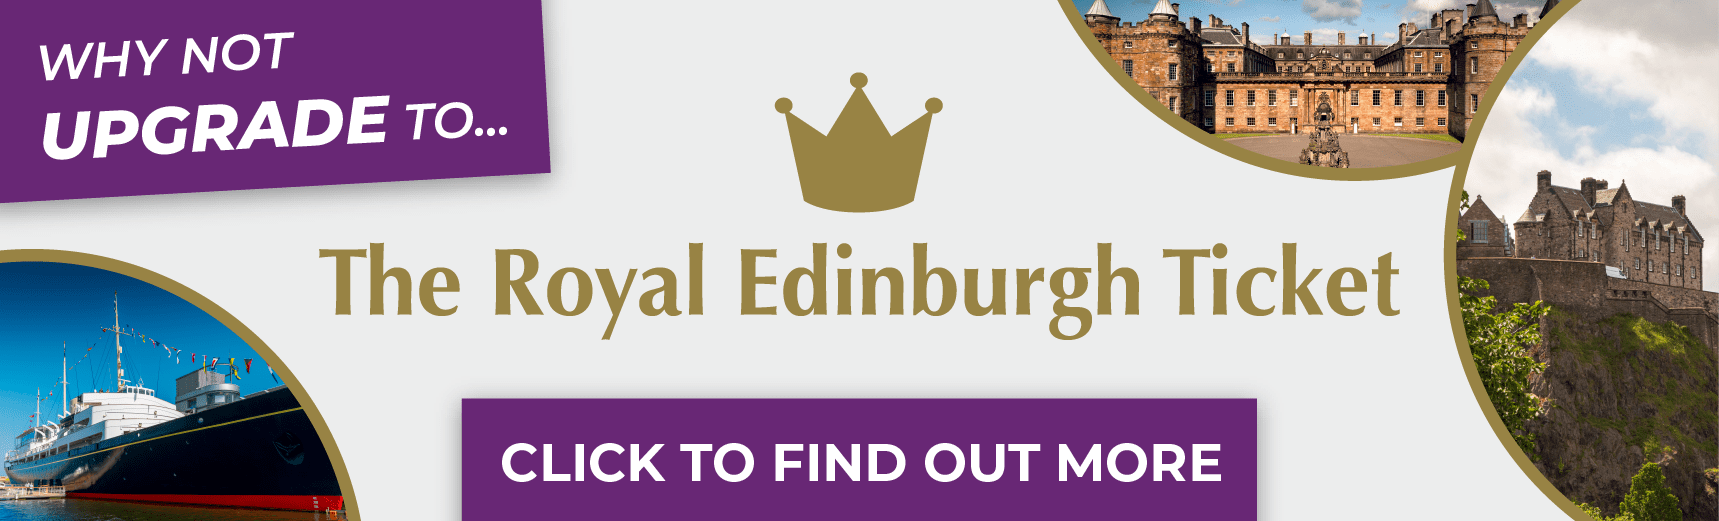 Why not upgrade to The Royal Edinburgh Ticket. Click to find out more.